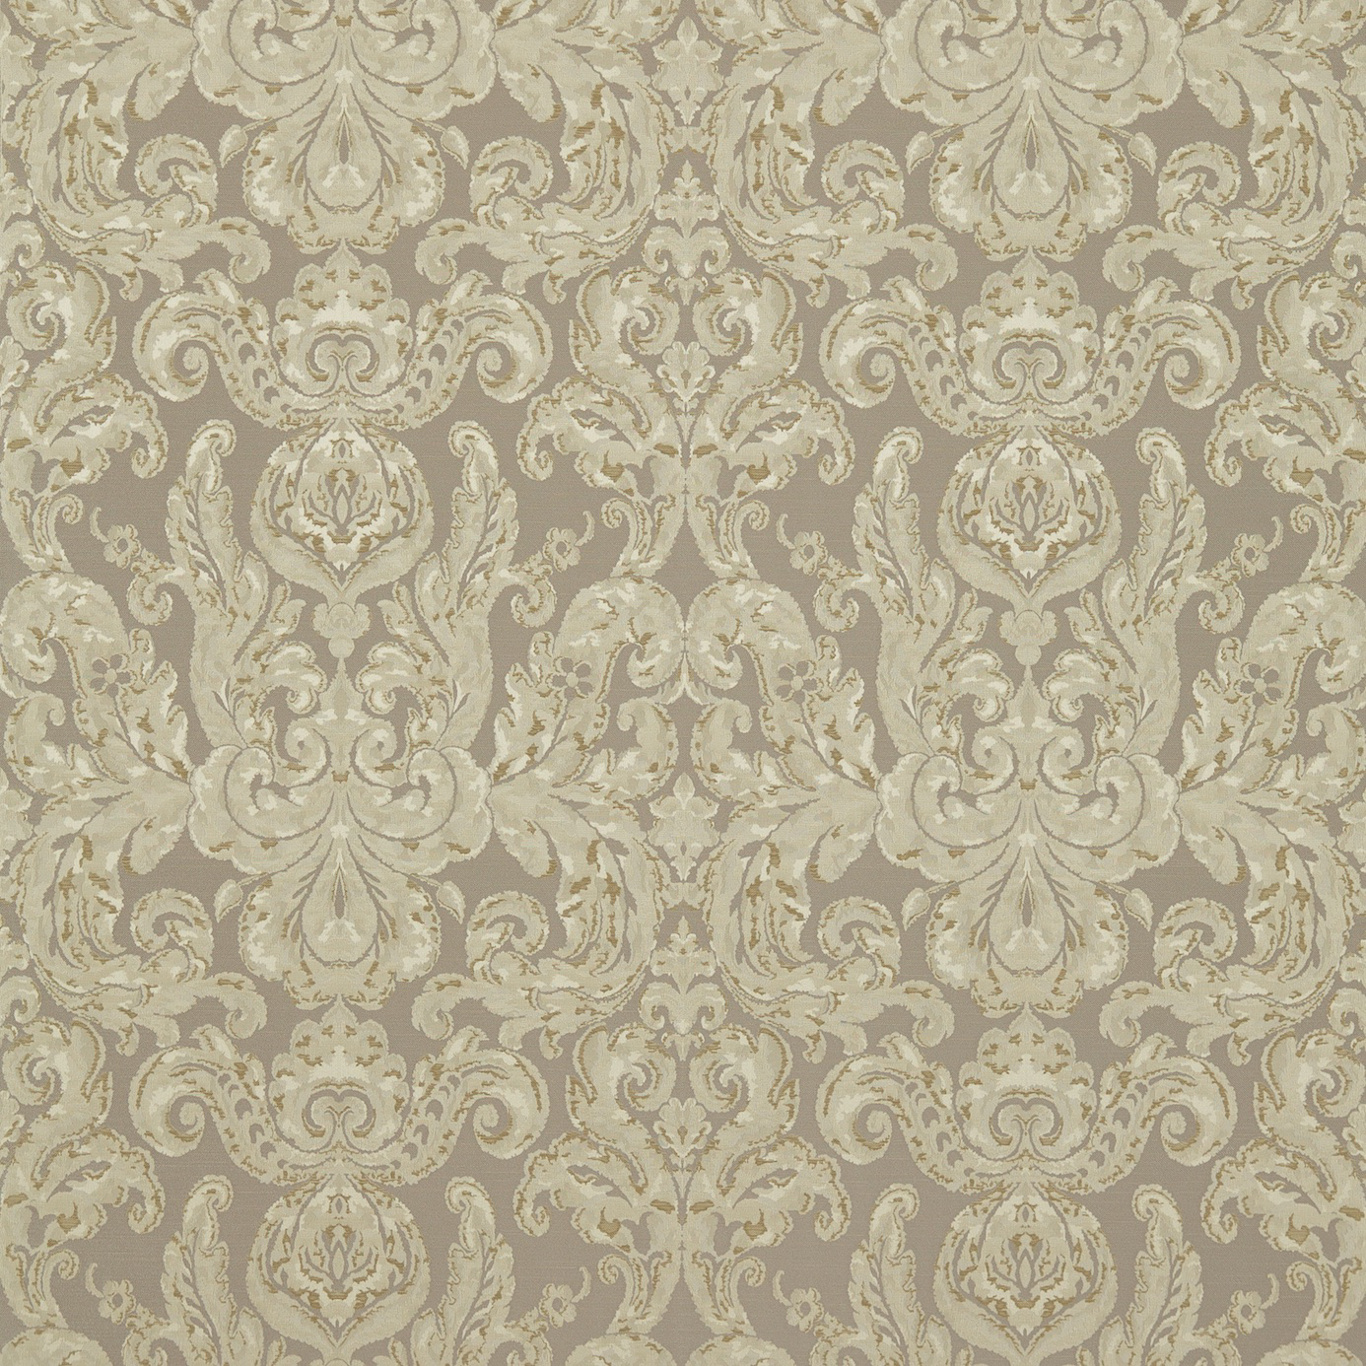 Brocatello Nuovo Antique Gold Fabric by ZOF